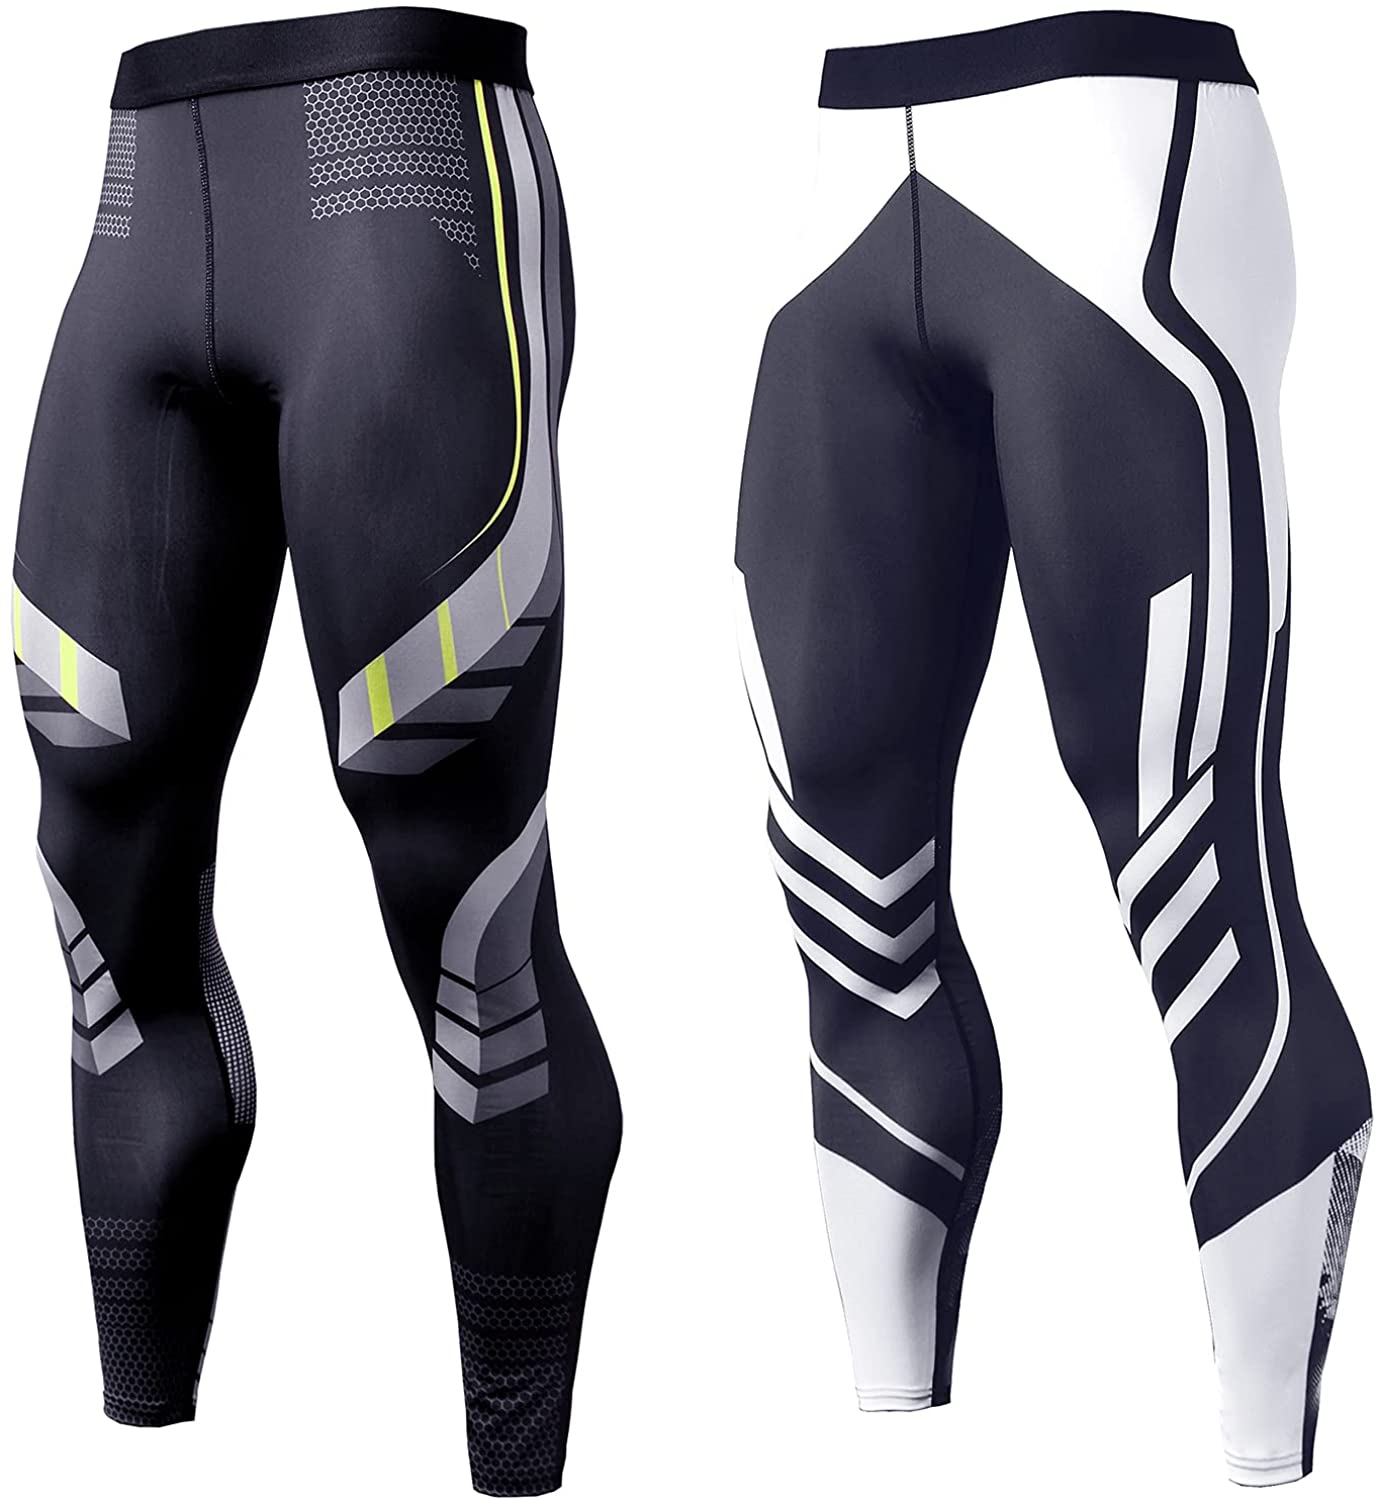 OEBLD Compression Pants Men UV Blocking Running Tights (Pack of 2)- X-Large  - Price in Pakistan